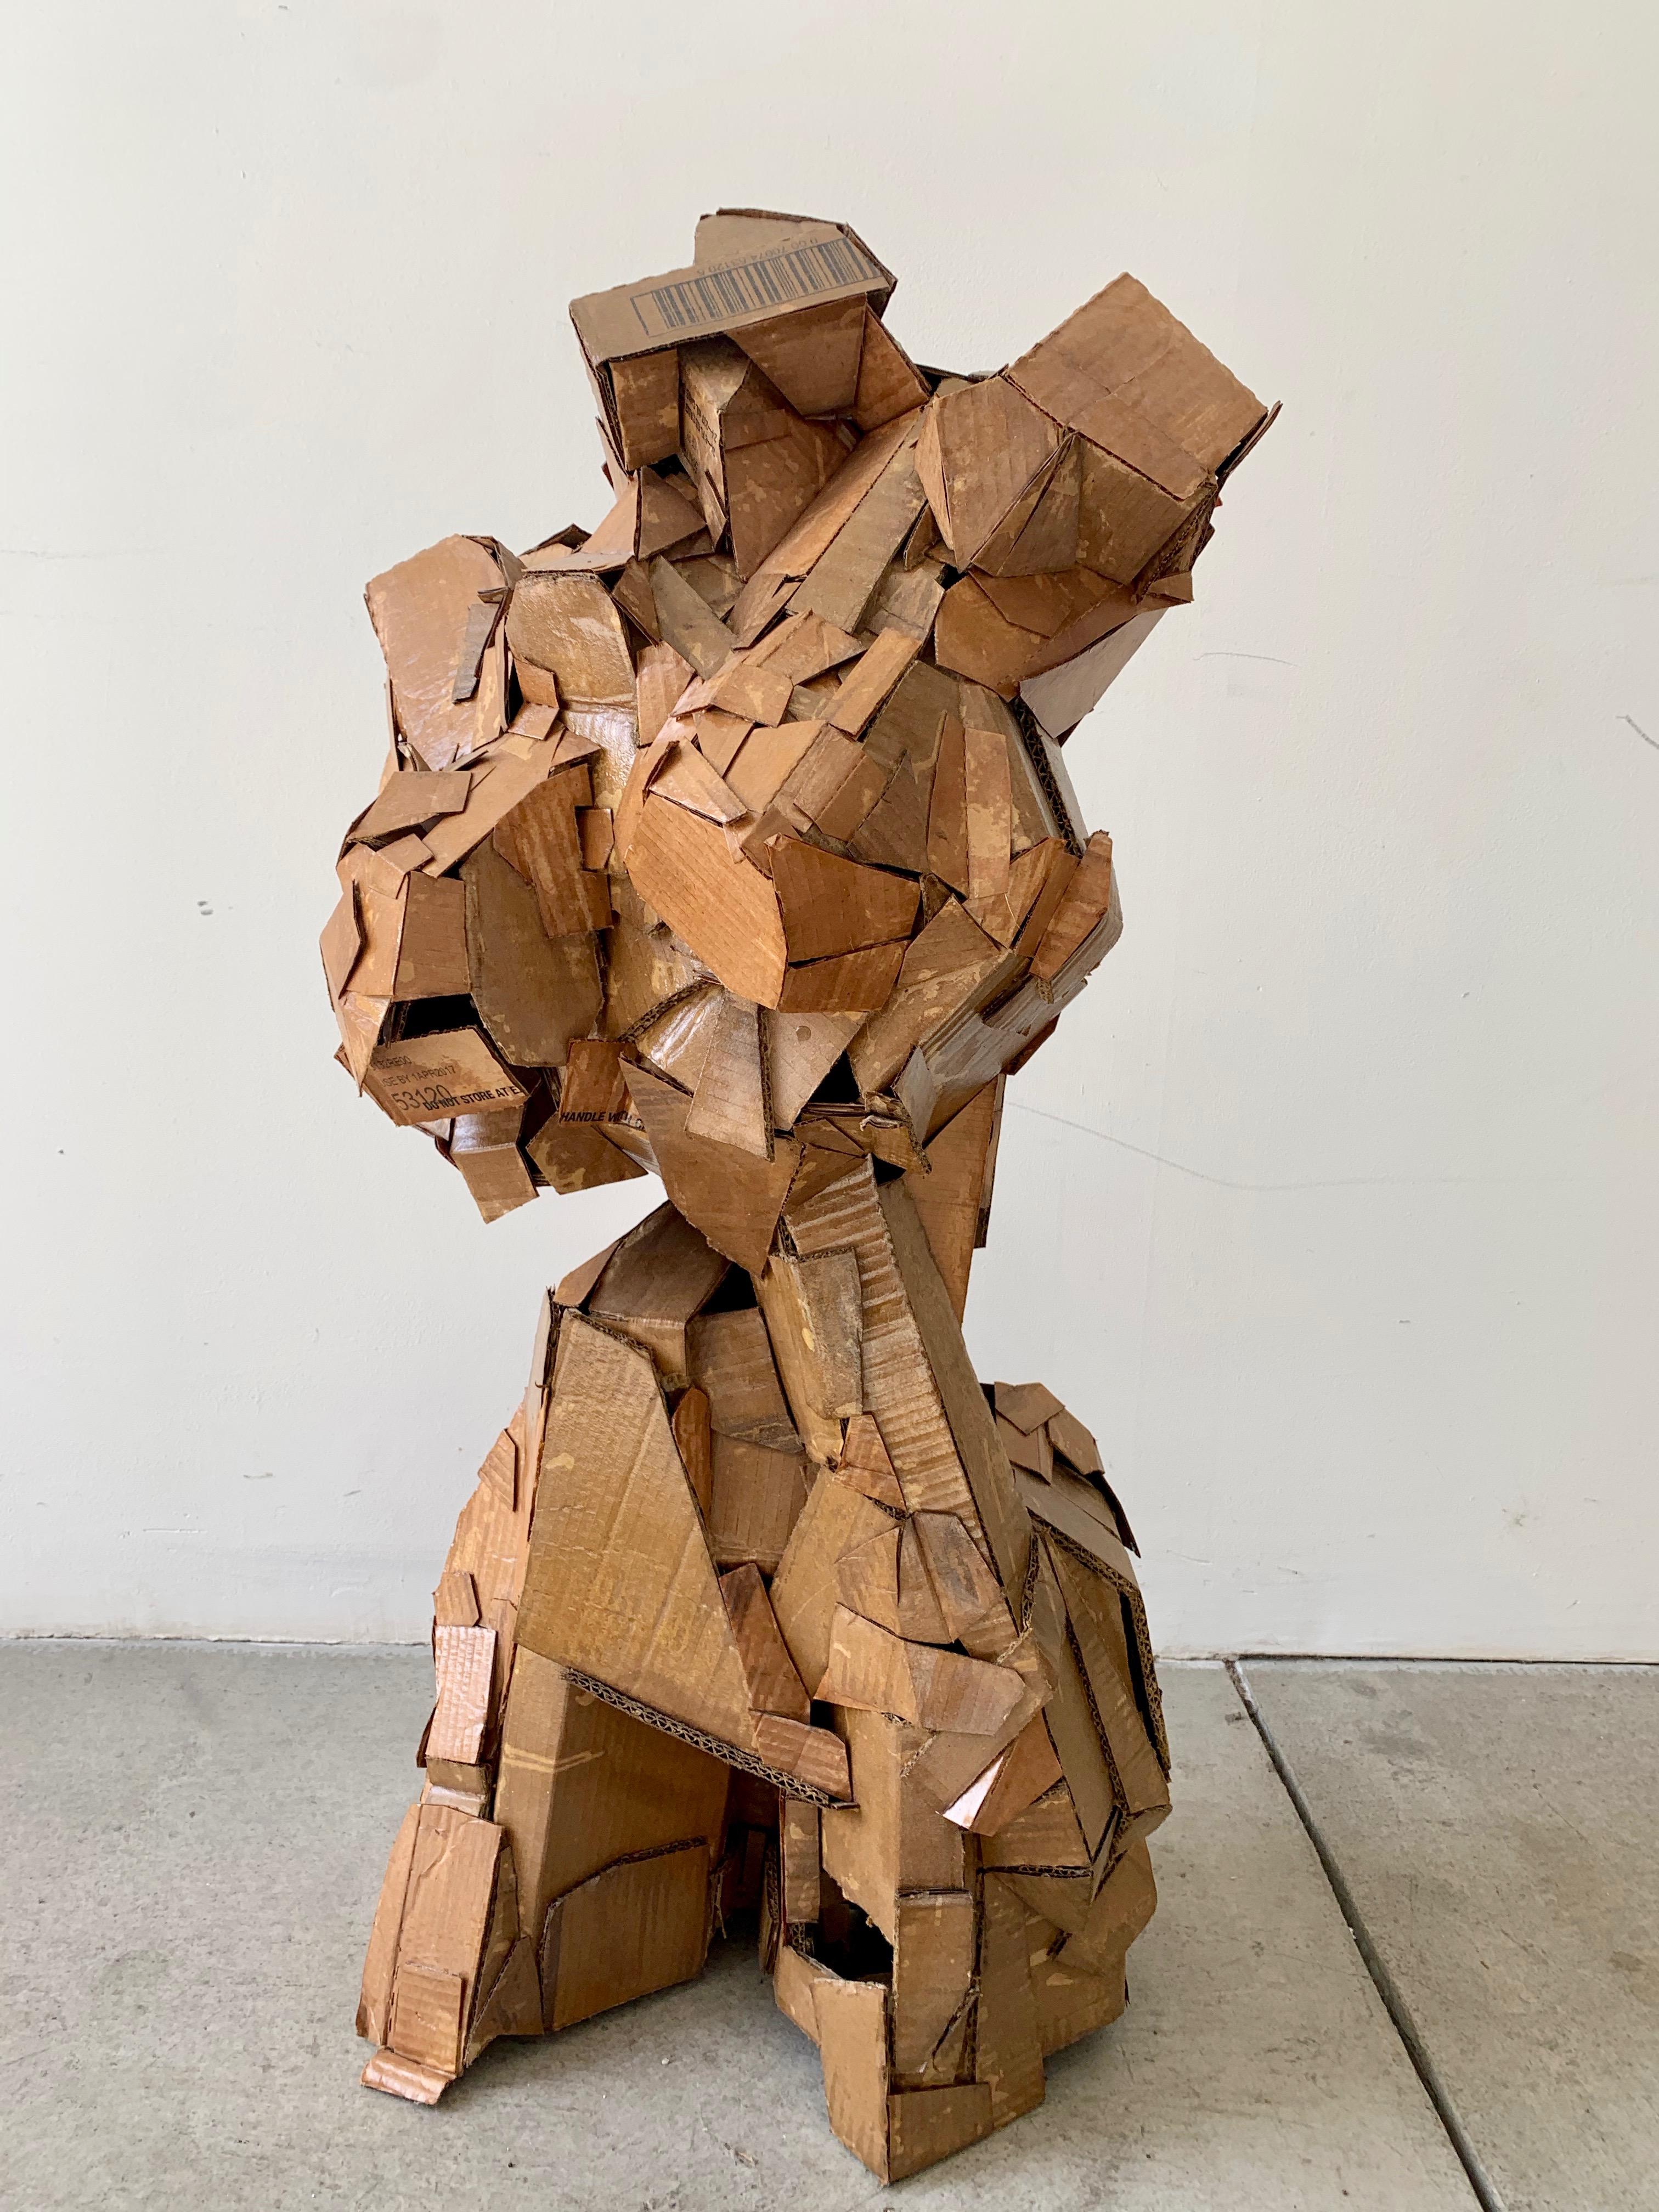 An original sculpture of a woman'S Form made of lacquered cardboard pieces - a wonderfully creative expression of the female form.

Wonderful in many rooms, a conversation piece in any room.